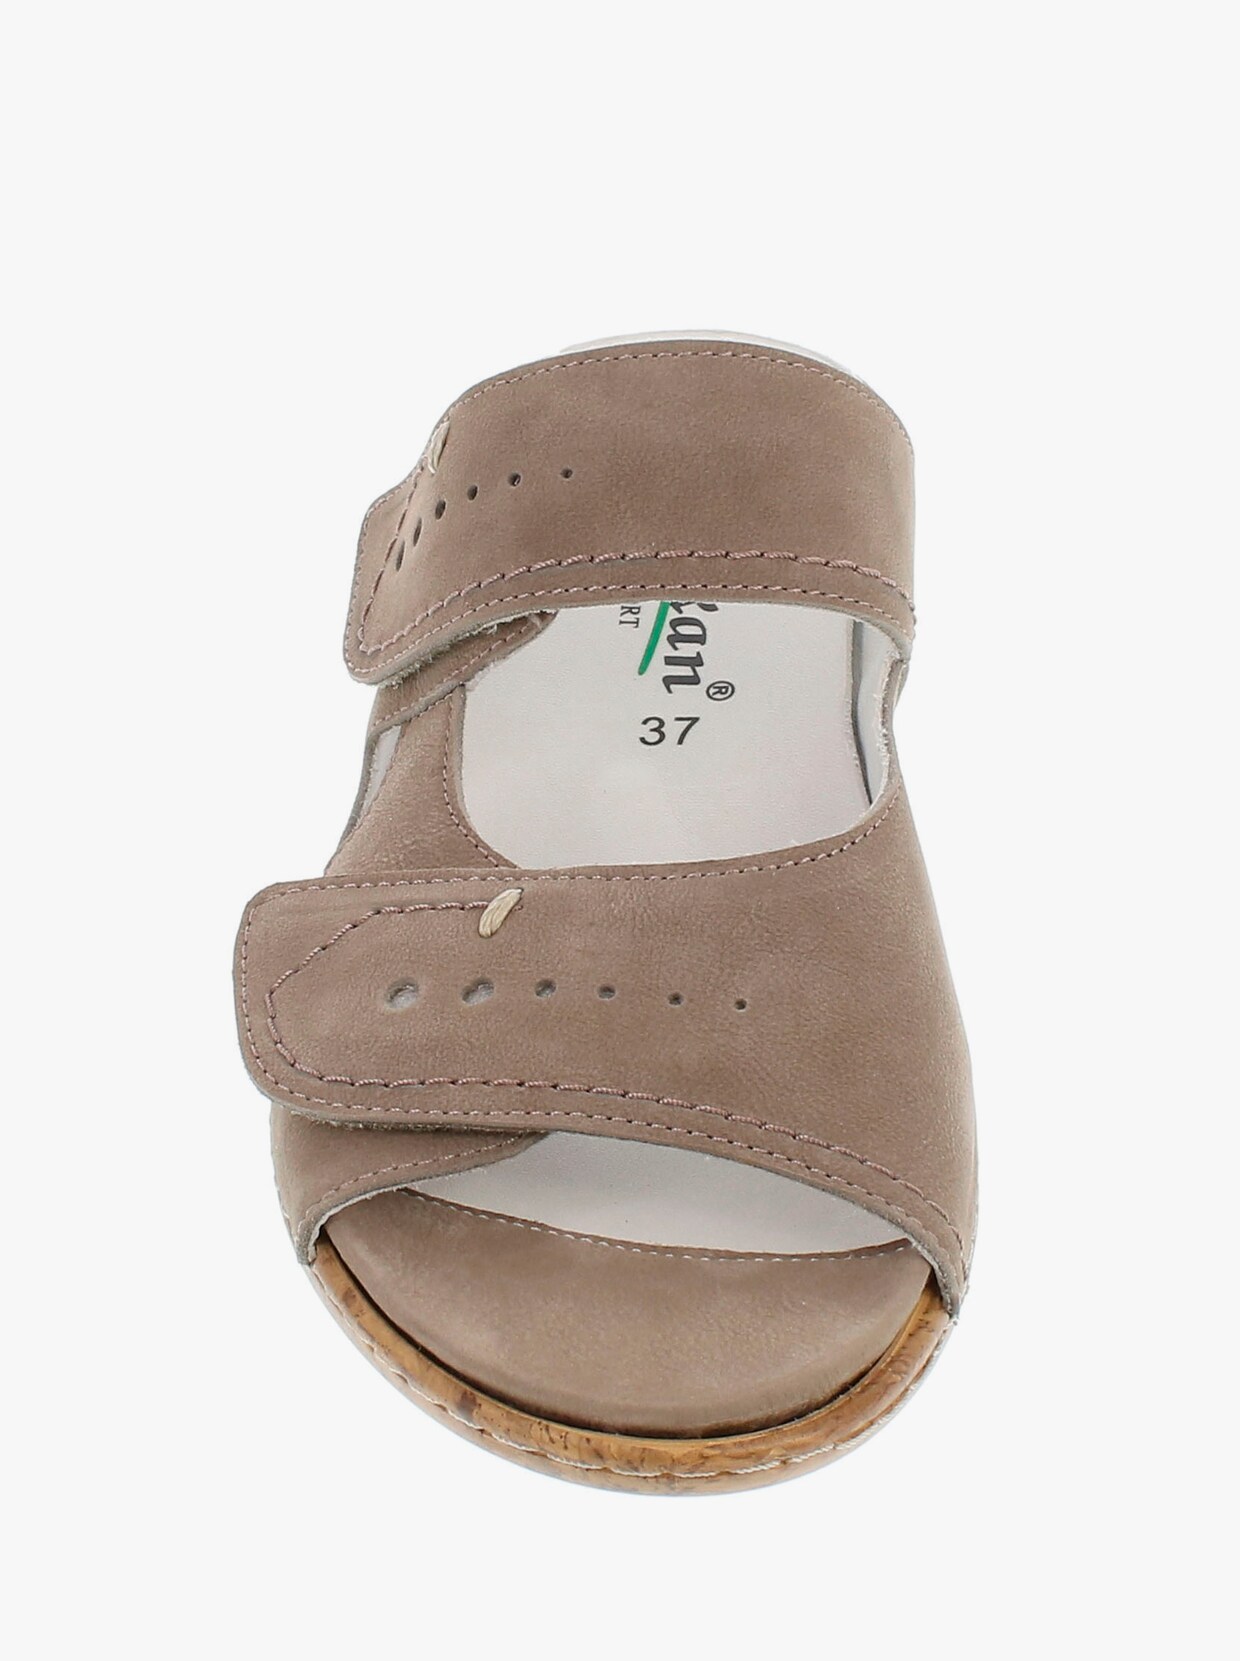 Reflexan slippers - taupe